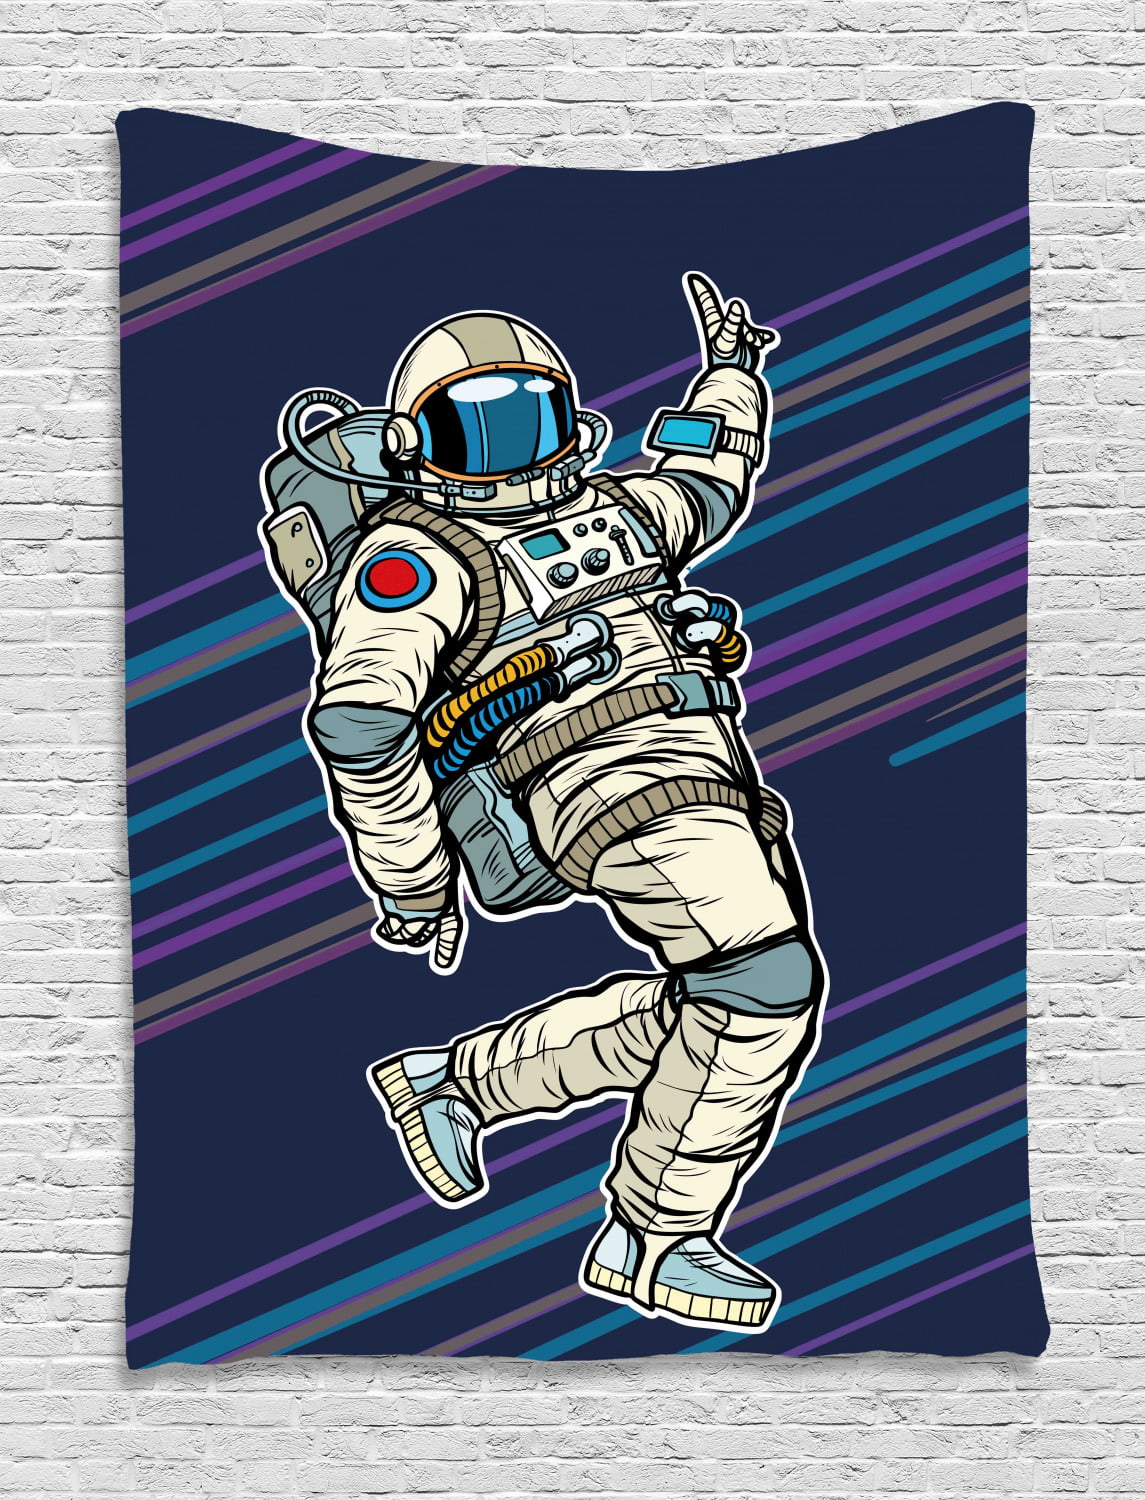 Wide Wall Hanging for Bedroom Living Room Dorm 60 X 40 Beige Blue Woman Astronaut Hands with Her Better Half Pop Art Style Comic Graphic Ambesonne Outer Space Tapestry